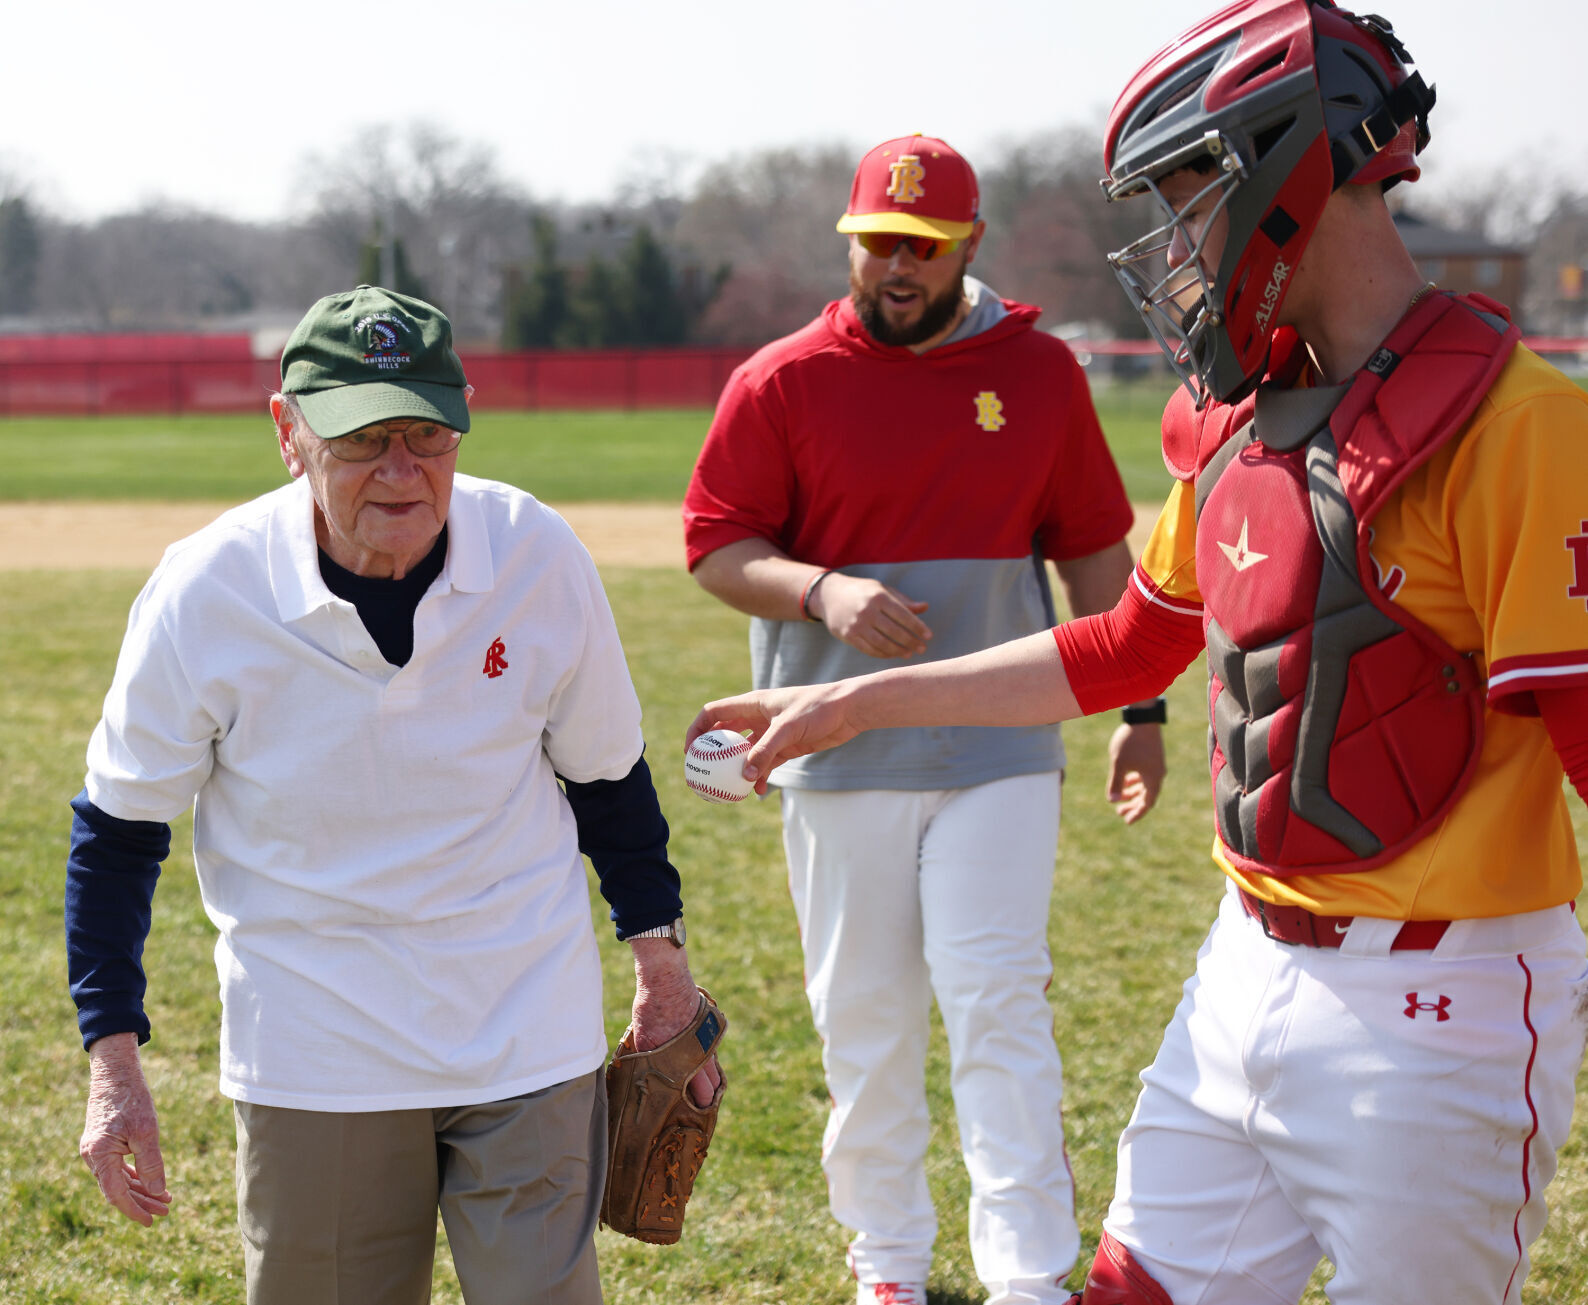 Rock Island High School’s Oldest Living Baseball Player, from the Class of 1949, Throws First Pitch at 92